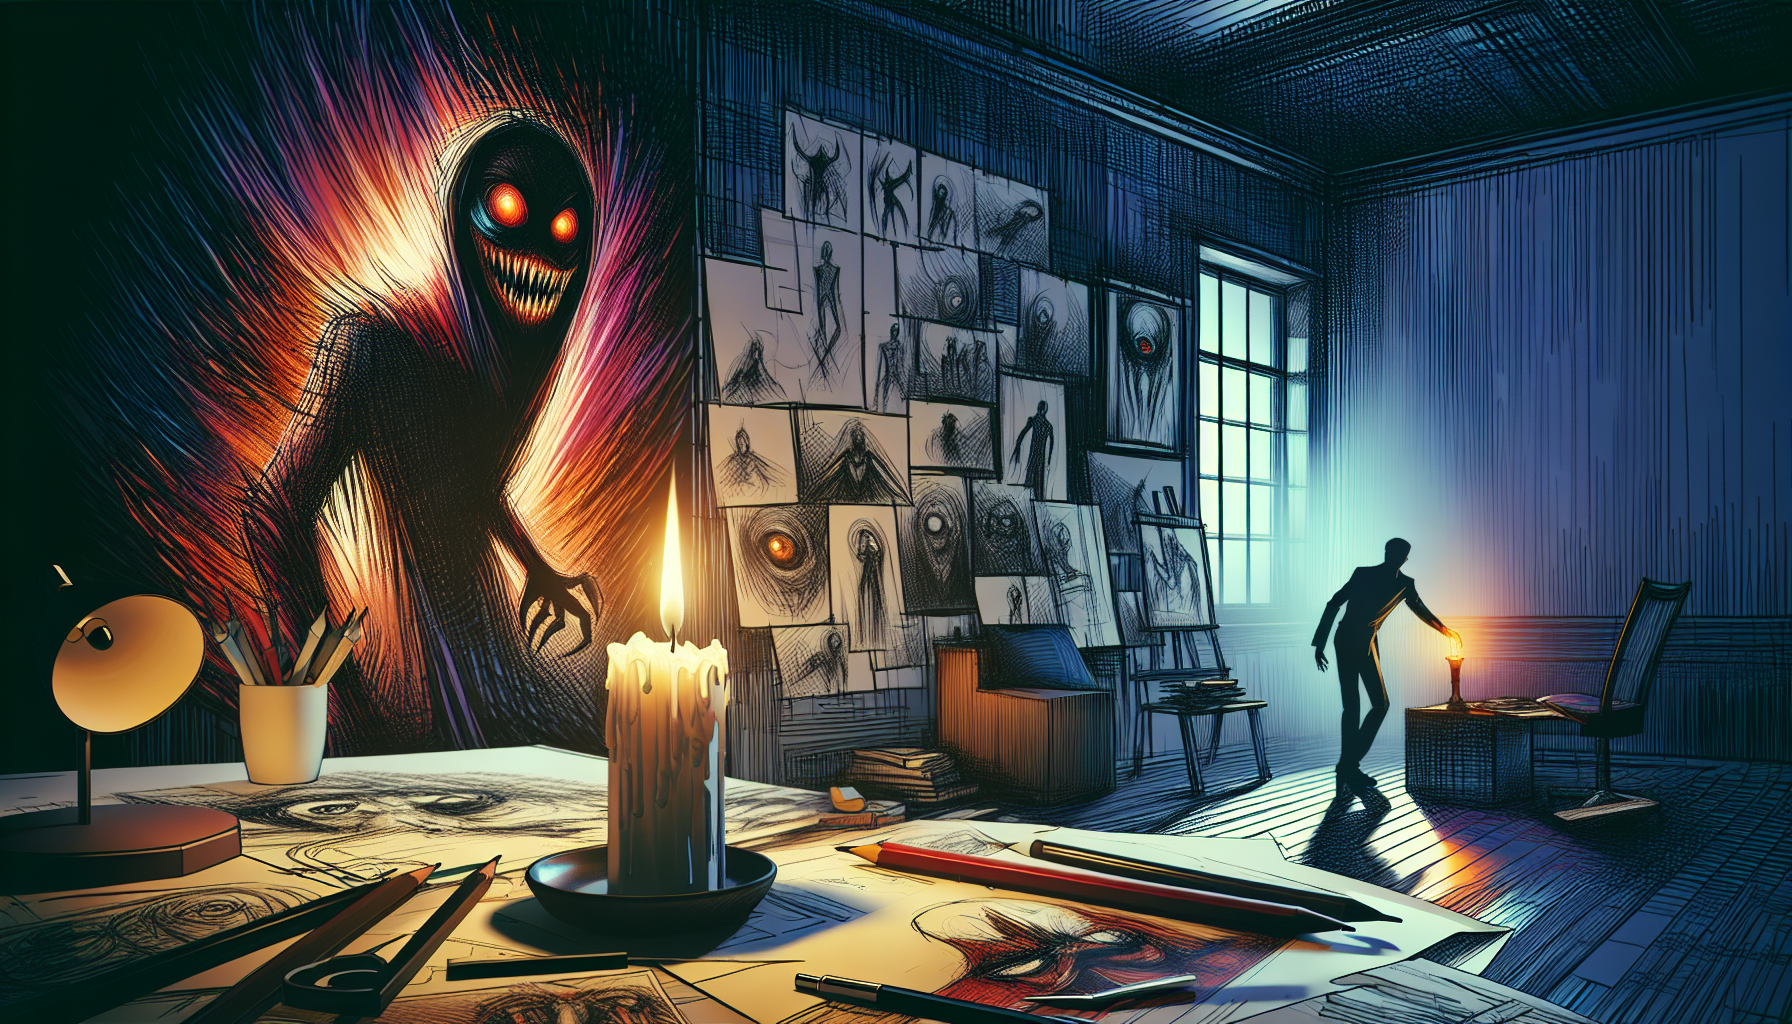 An artist's studio filled with sketches and notes on creating the ultimate horror villain, illuminated by the eerie glow of a single candle, with shadowy figures lurking in the background.